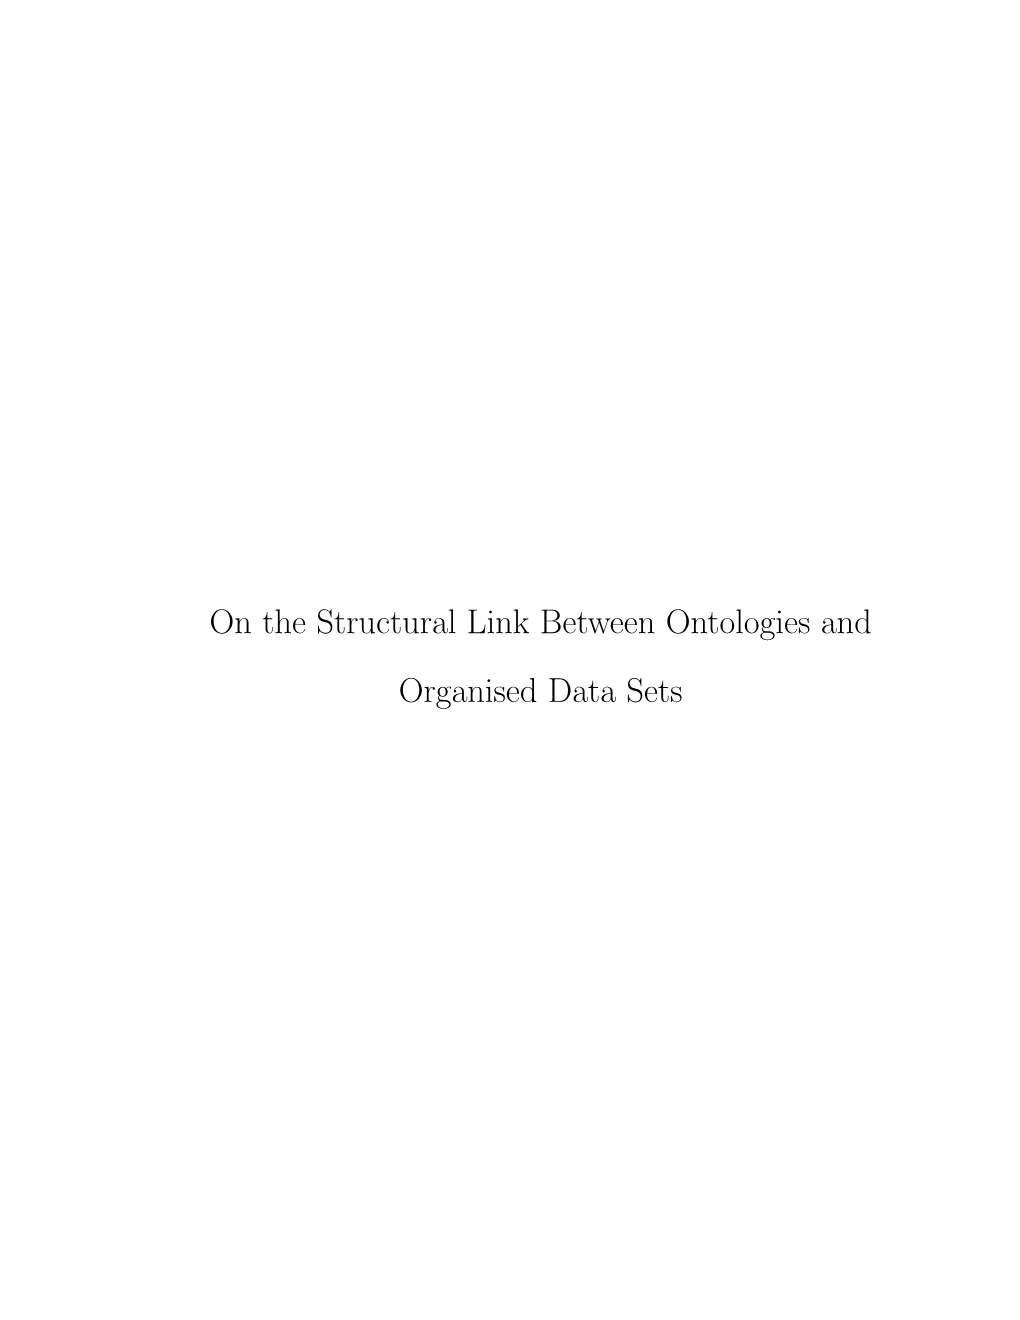 On the Structural Link Between Ontologies and Organised Data Sets on the STRUCTURAL LINK BETWEEN ONTOLOGIES AND